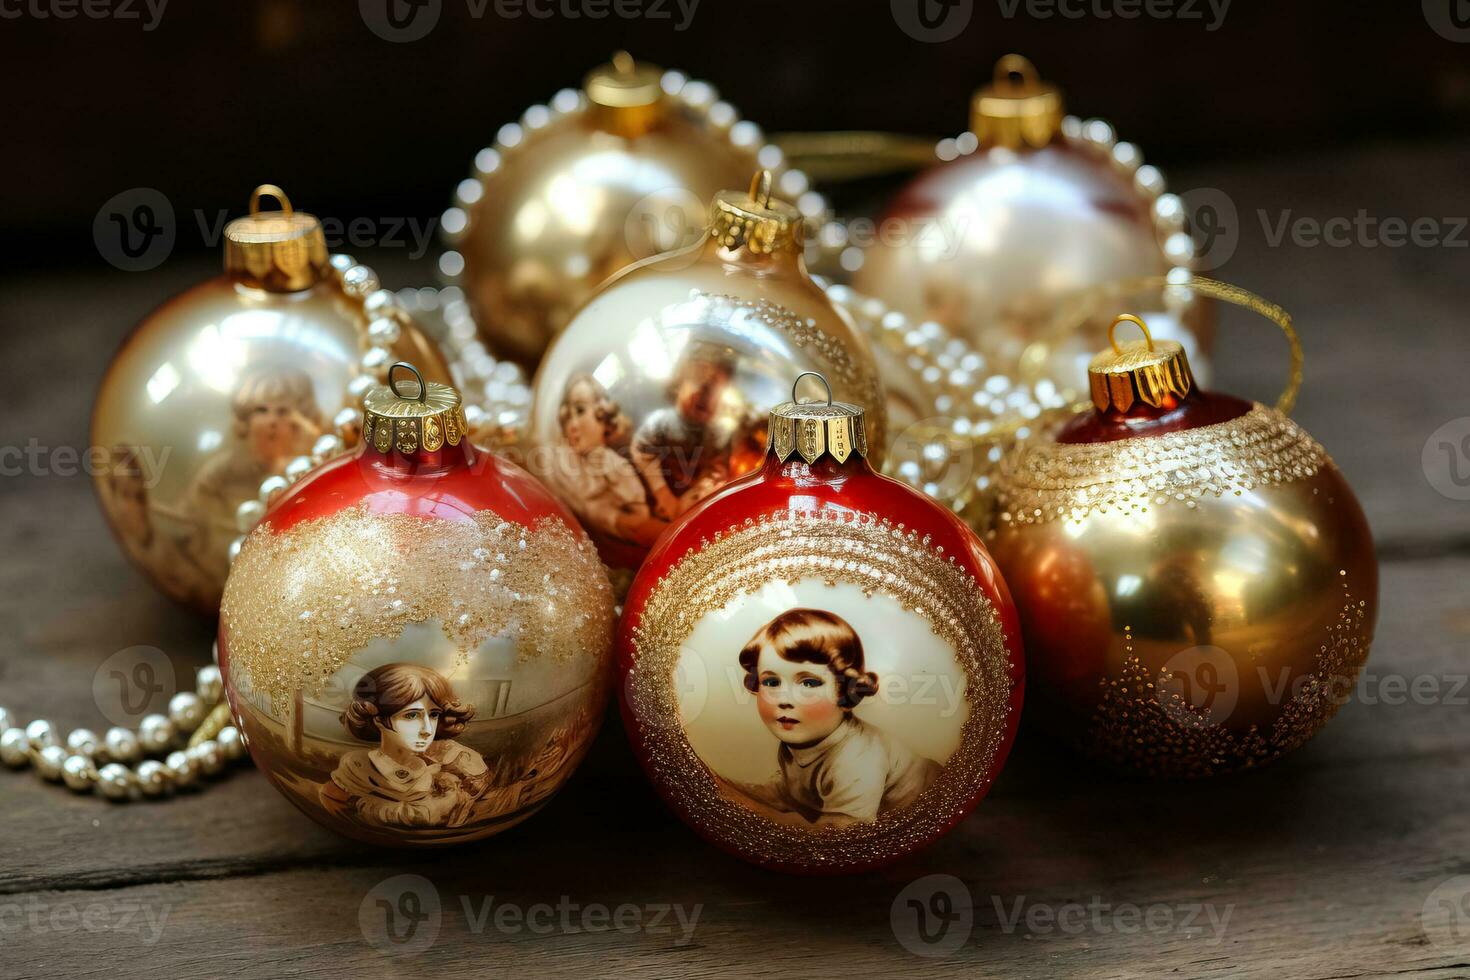 Vintage handmade Christmas ornaments nostalgically crafted adding a timeless touch to holiday celebrations photo